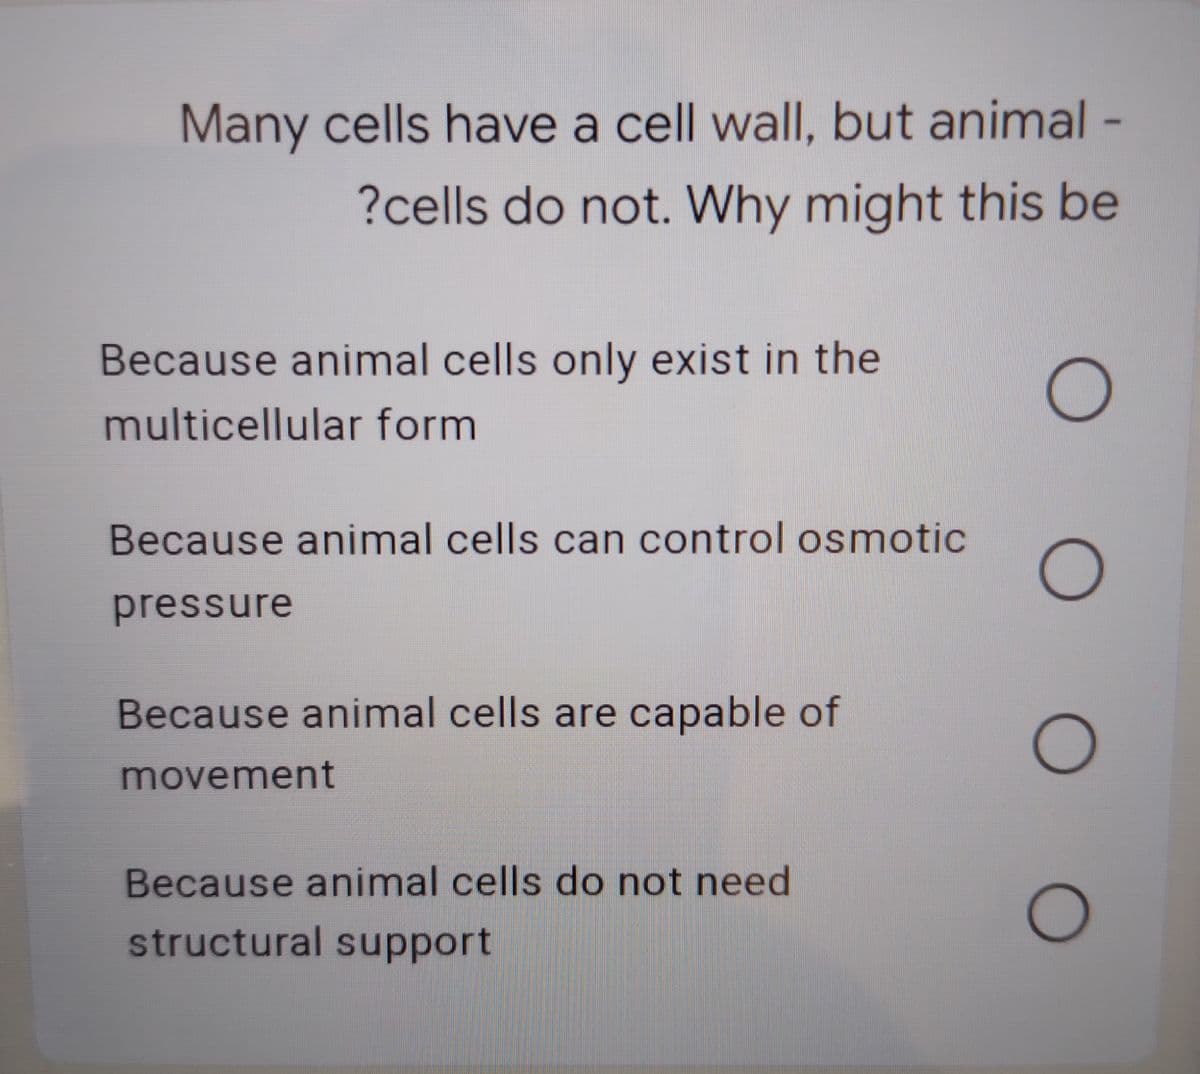 Many cells have a cell wallI, but animal -
?cells do not. Why might this be
Because animal cells only exist in the
multicellular form
Because animal cells can control osmotic
pressure
Because animal cells are capable of
movement
Because animal cells do not need
structural support
